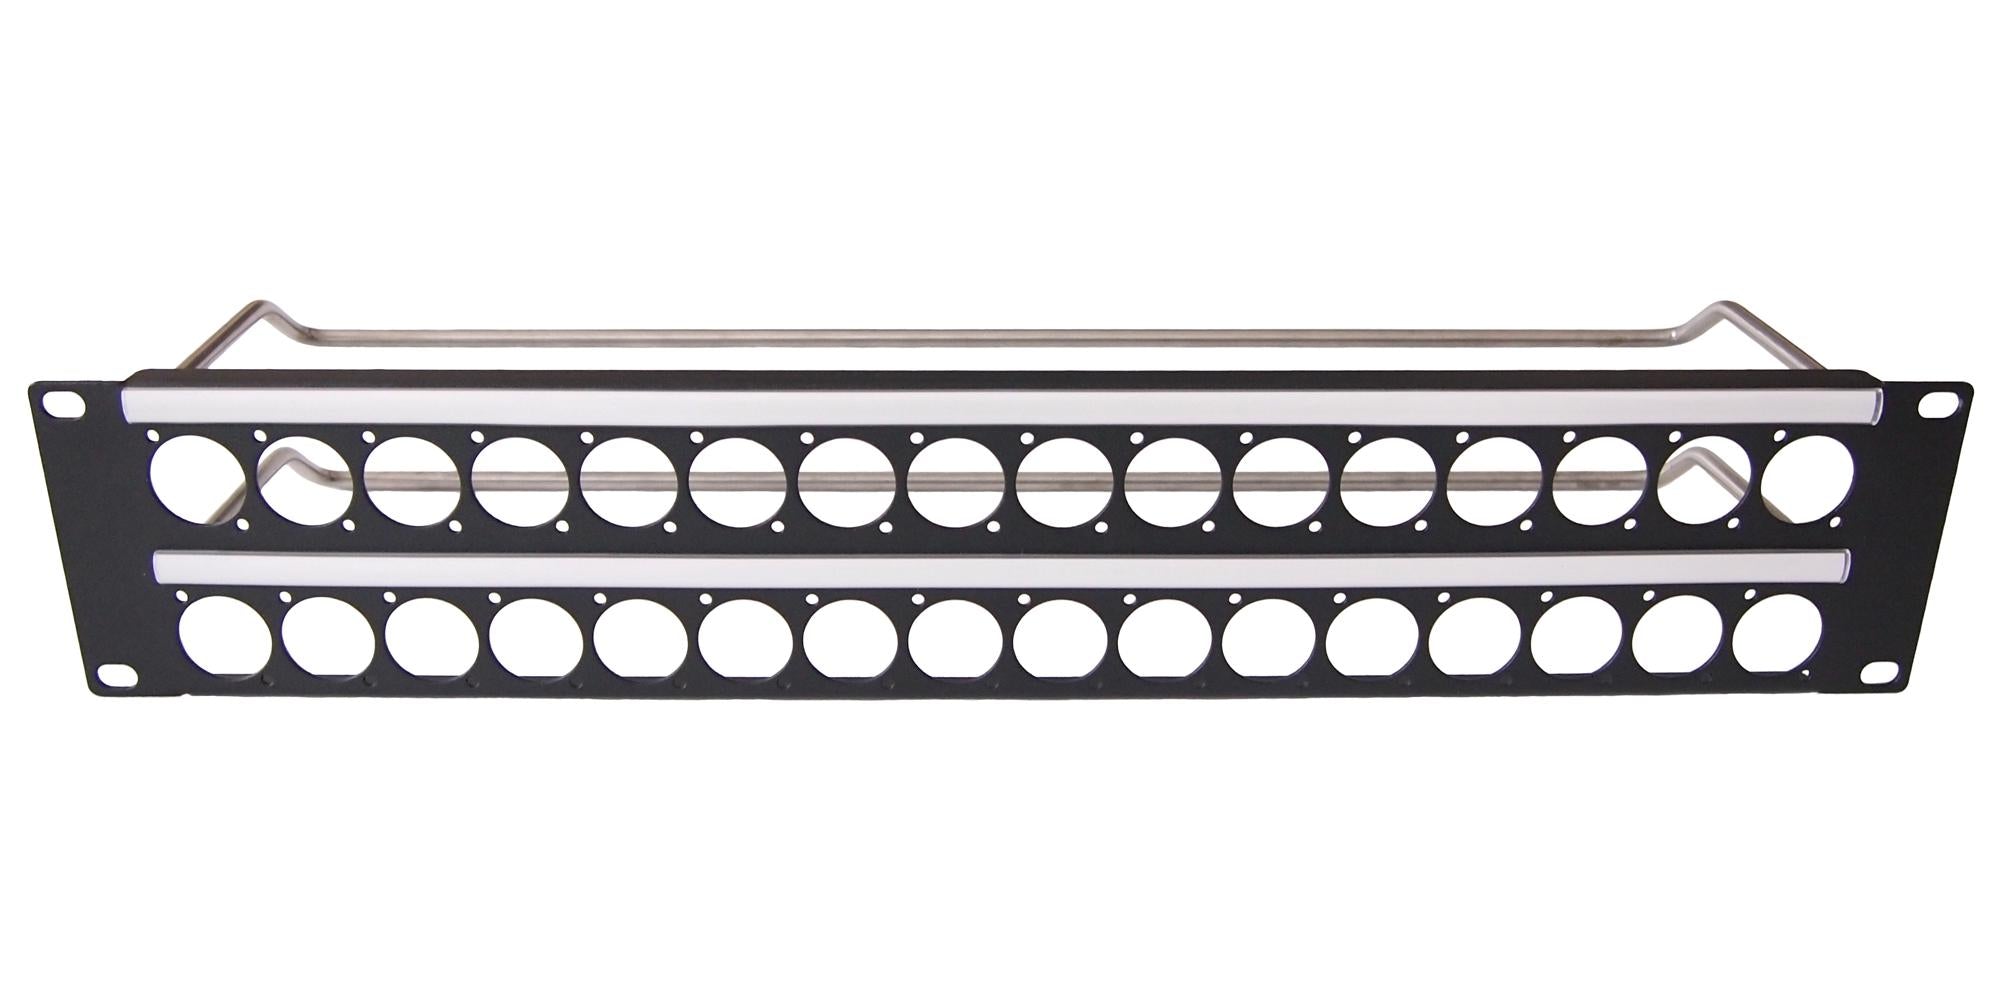 CP30156 PATCH PANEL,W/ M3 HOLE, 32PORT, 2U CLIFF ELECTRONIC COMPONENTS